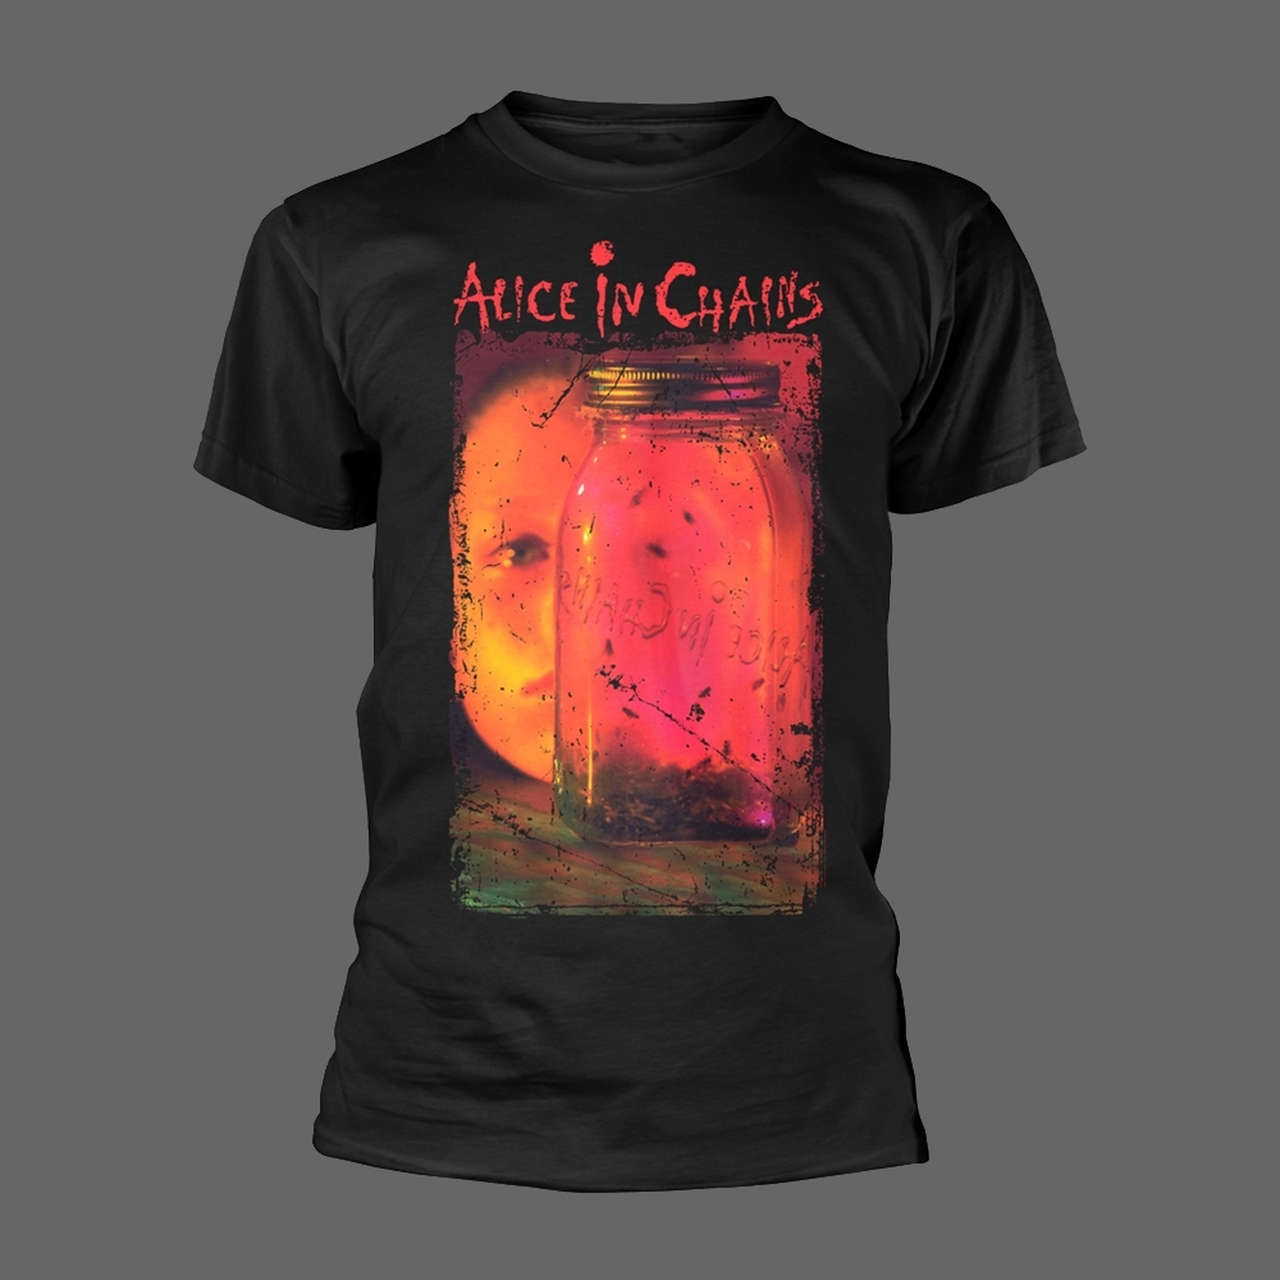 Alice in Chains - Jar of Flies (T-Shirt)